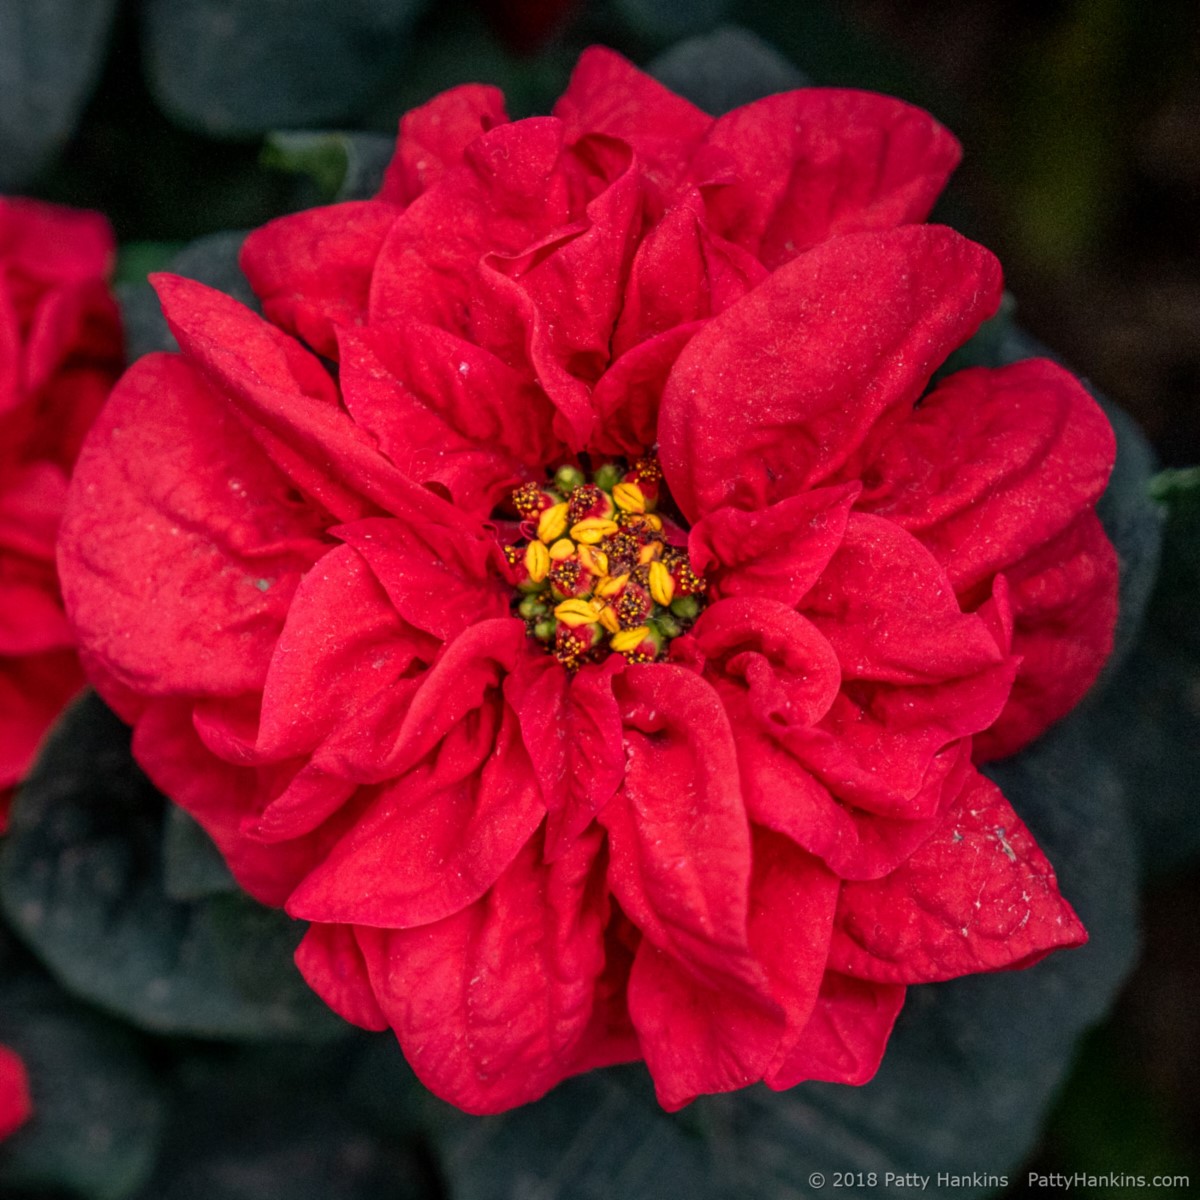 Winter Rose Early Red Poinsettia © 2018 Patty Hankins